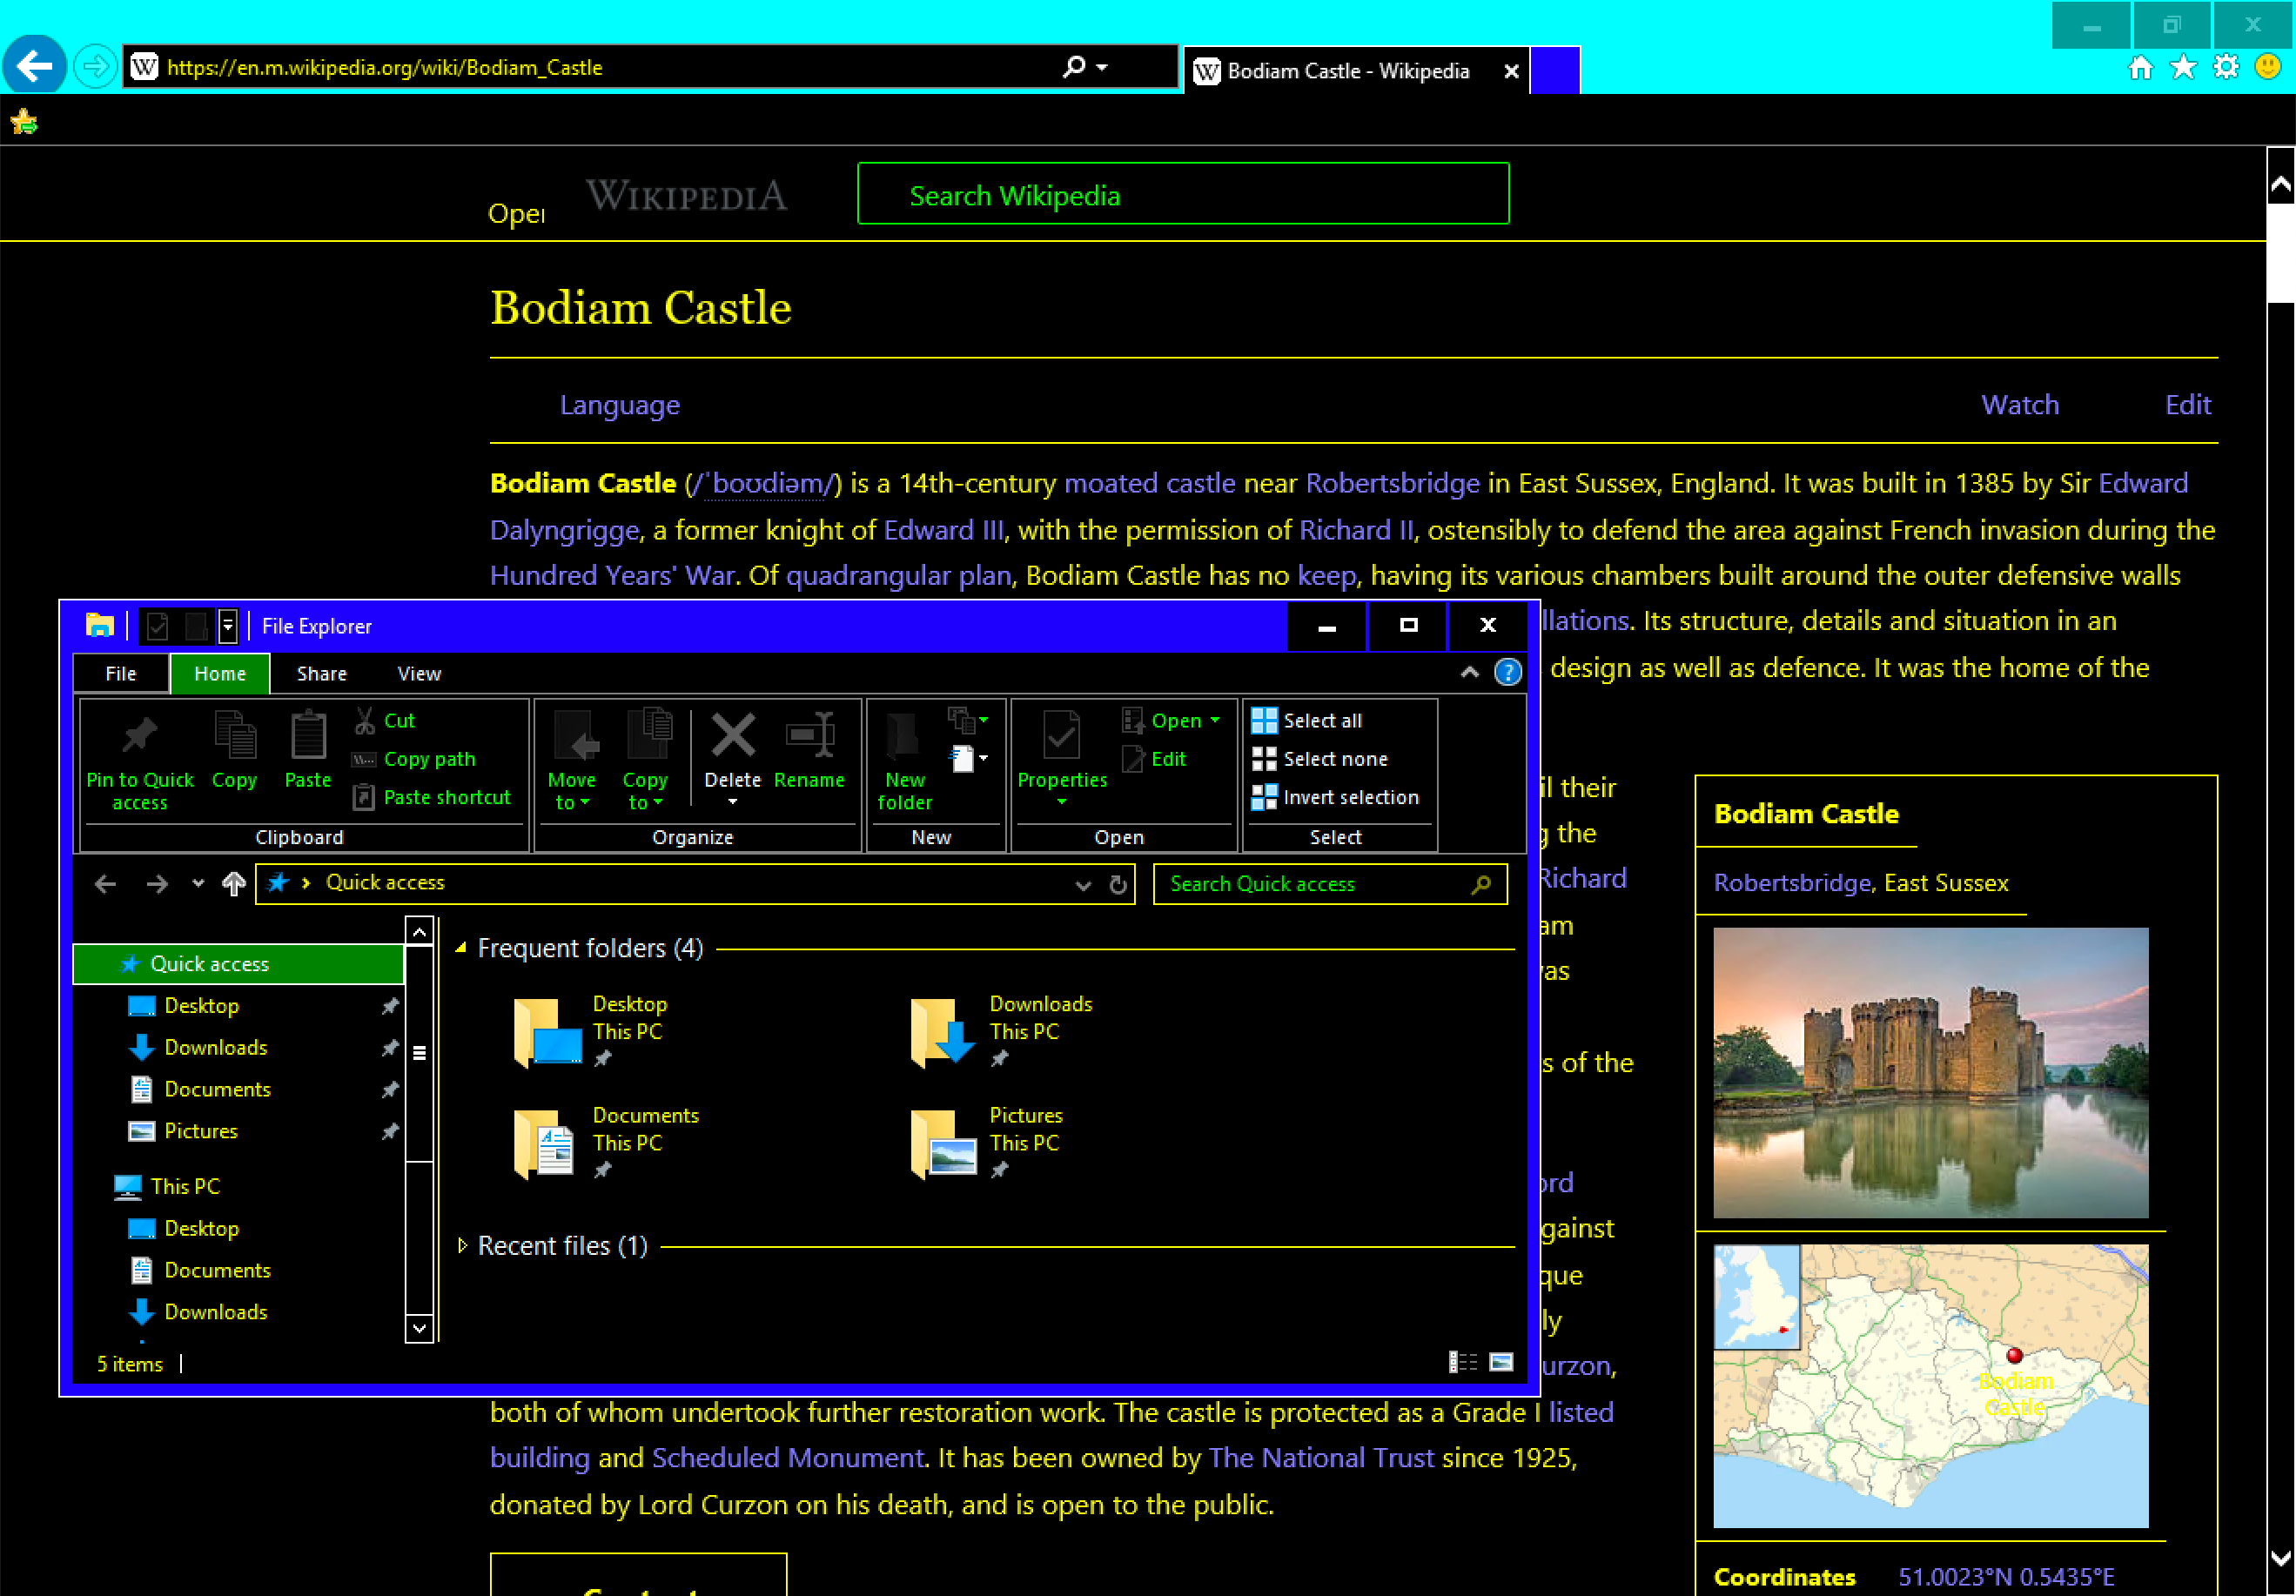 Screenshot of High Contrast Mode running on Windows 10. A Wikipedia page for Bodiam Castle is in the background, displayed in Internet Explorer 11. In the foreground is a window showing Windowâ€™s File Explorer. Content for both the Operating System UI and web content have been updated to display high contrast color values.